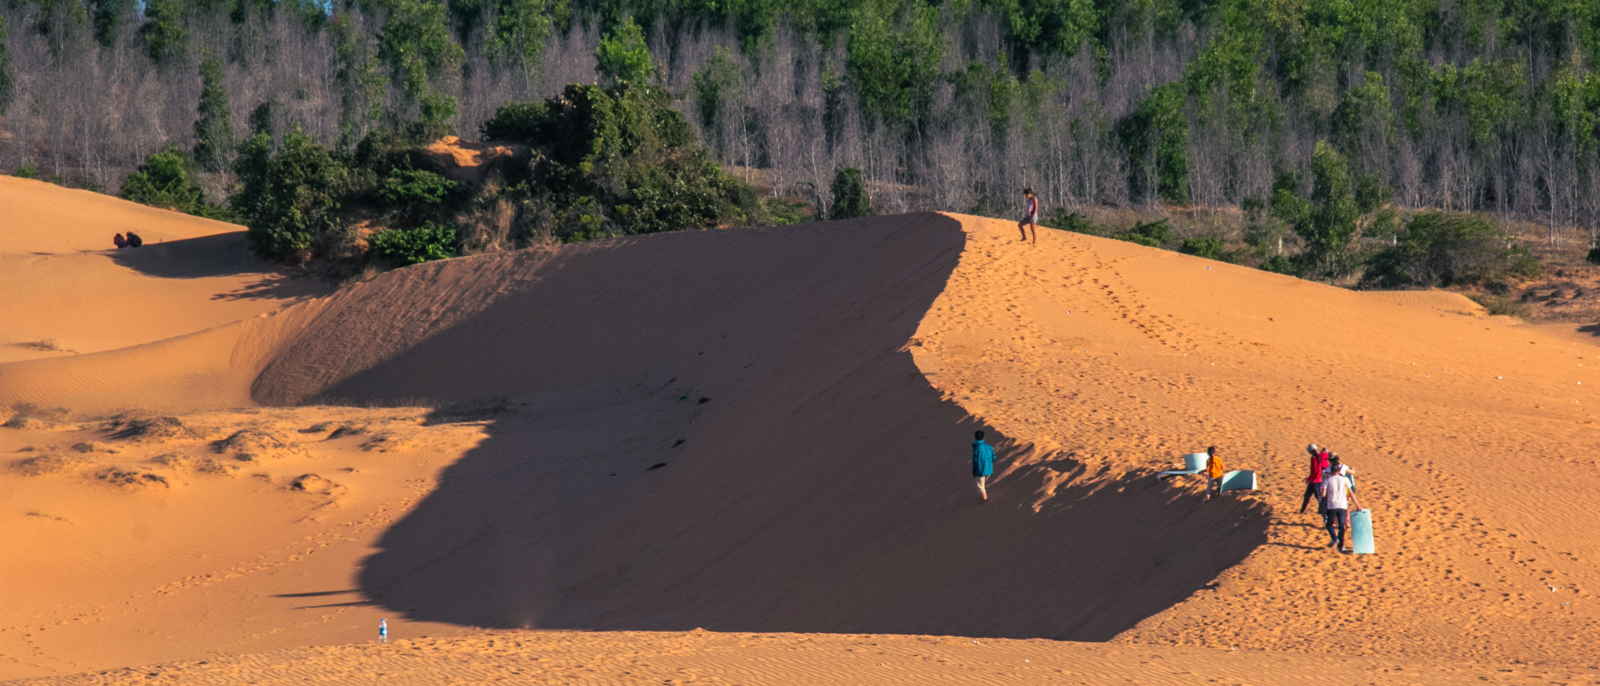 People are holding boards to play at the Red sand dunes